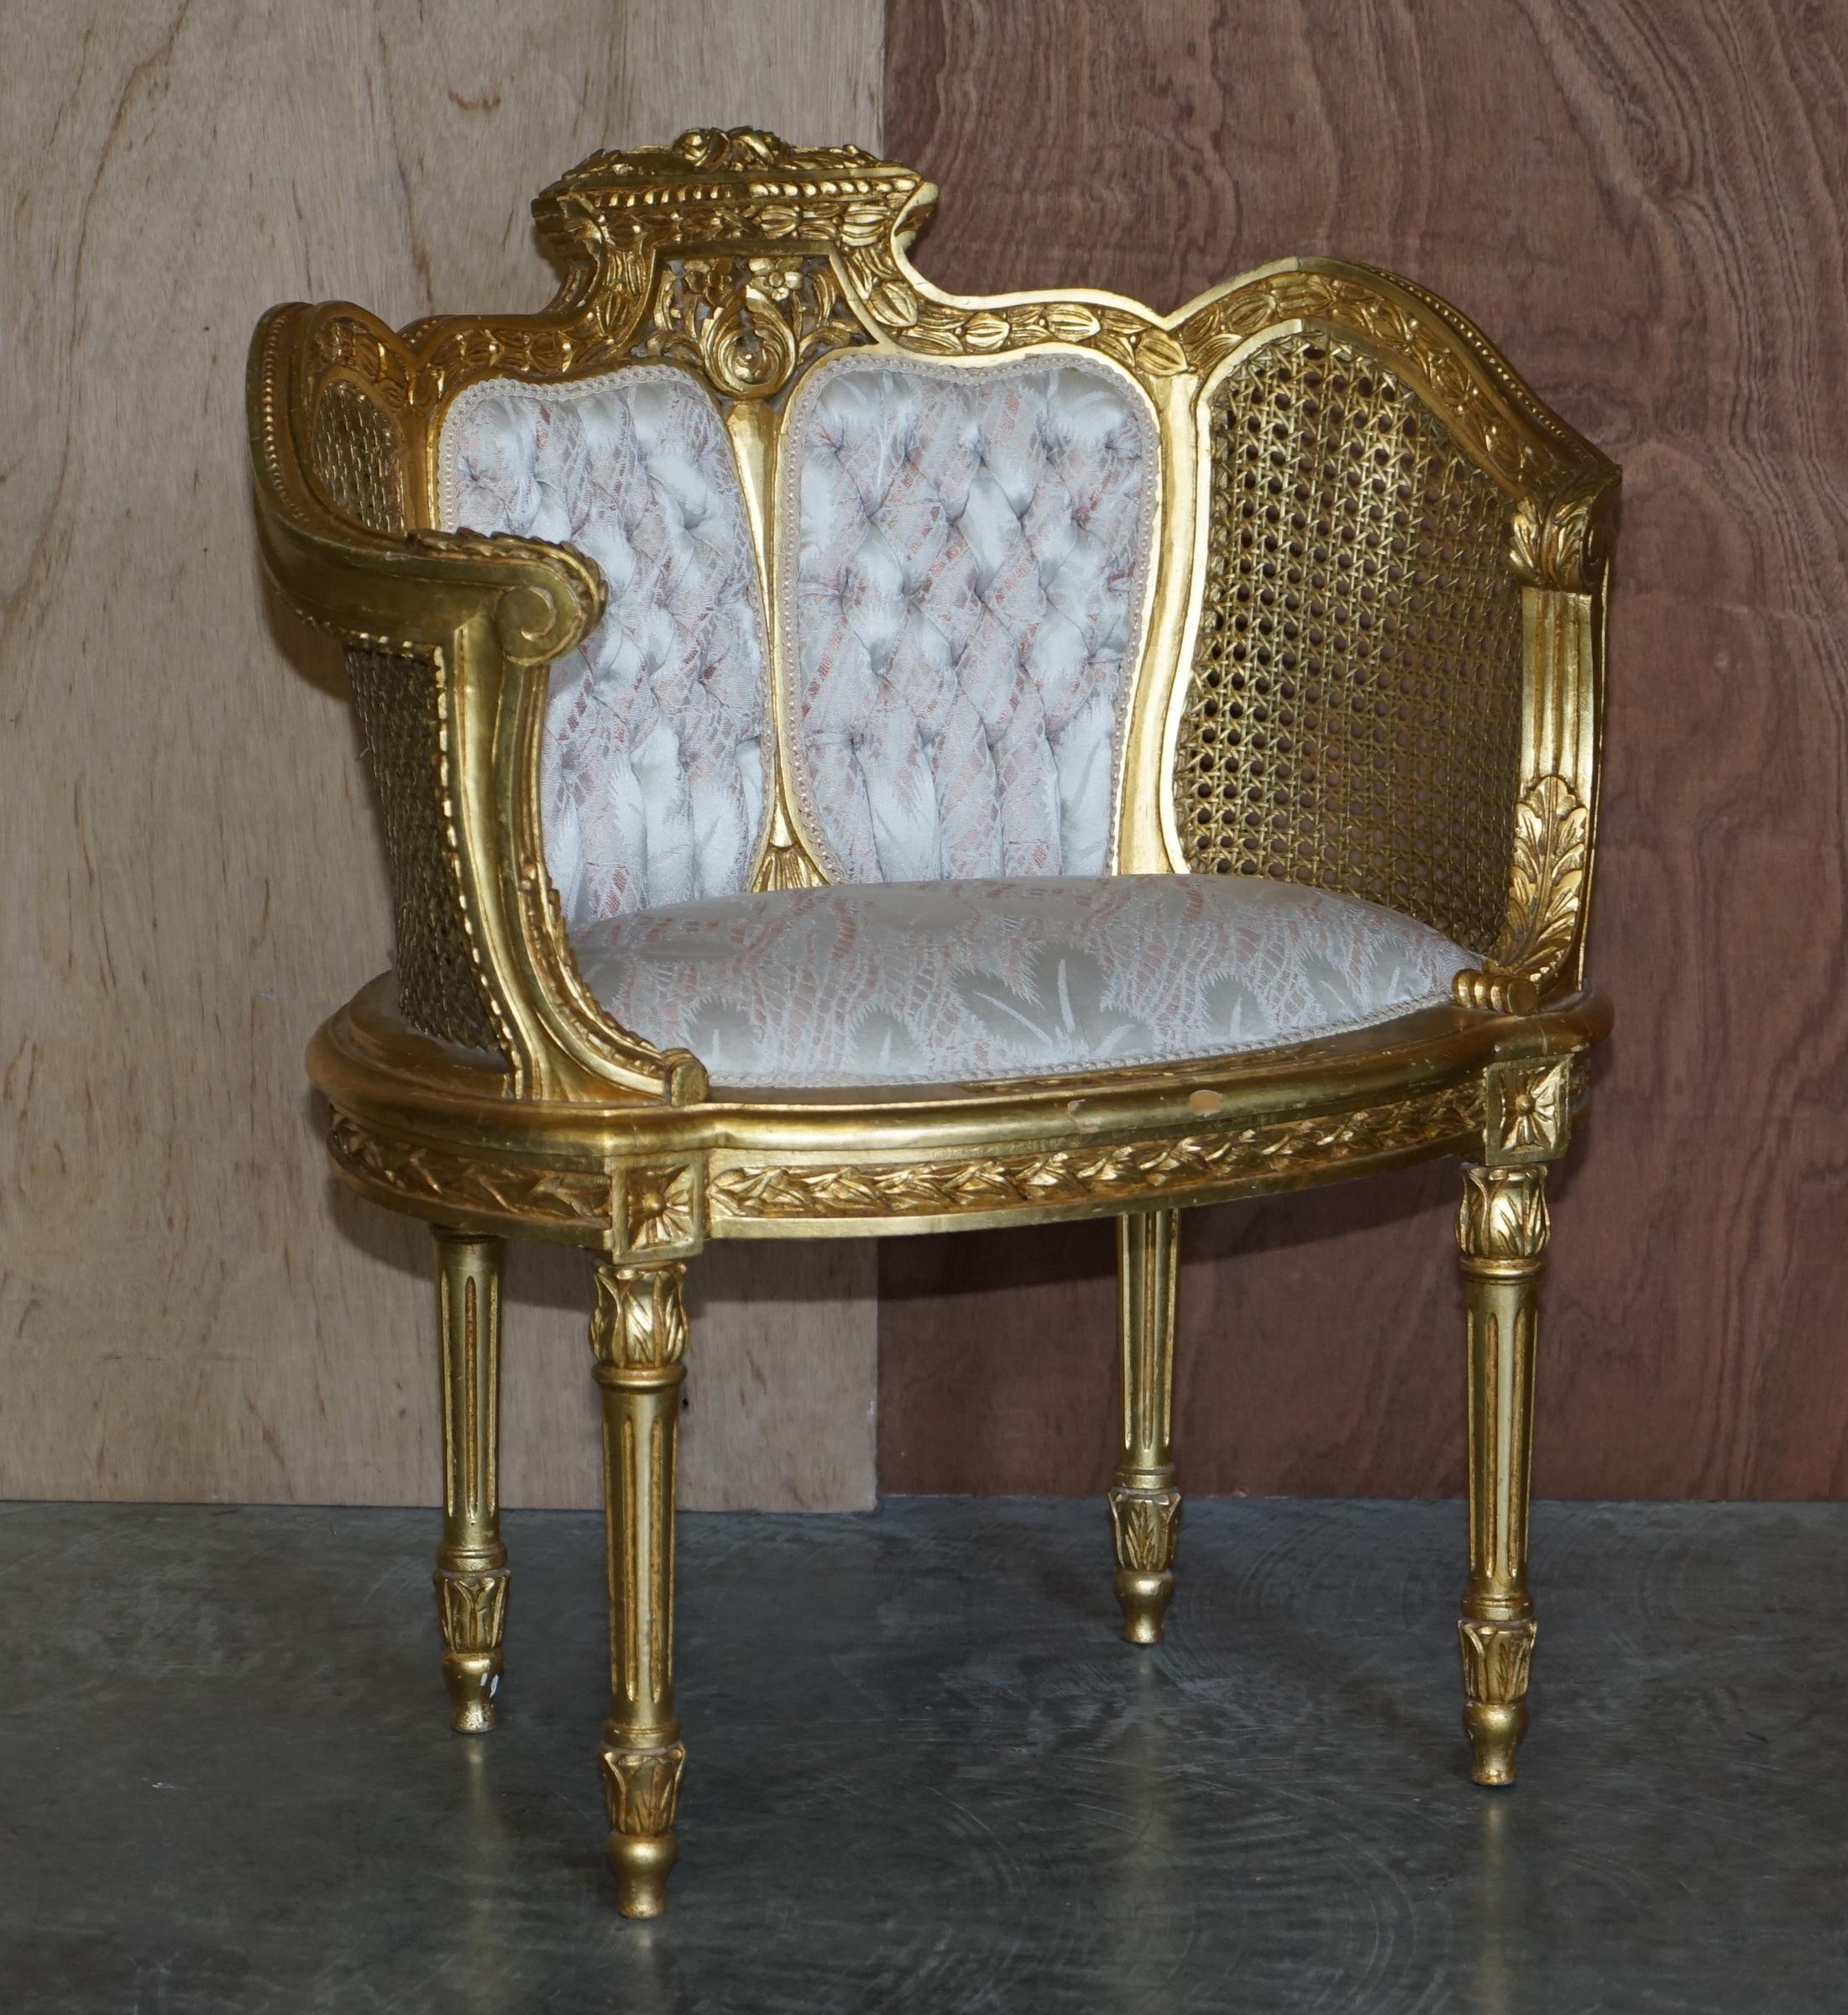 We are delighted to offer this stunning pair of original circa 1860-1870 Napoleon III Louis XVI style bergère armchairs which are part of a suite 

These chairs come with a matching parlour settee which is listed under my other items

They are a